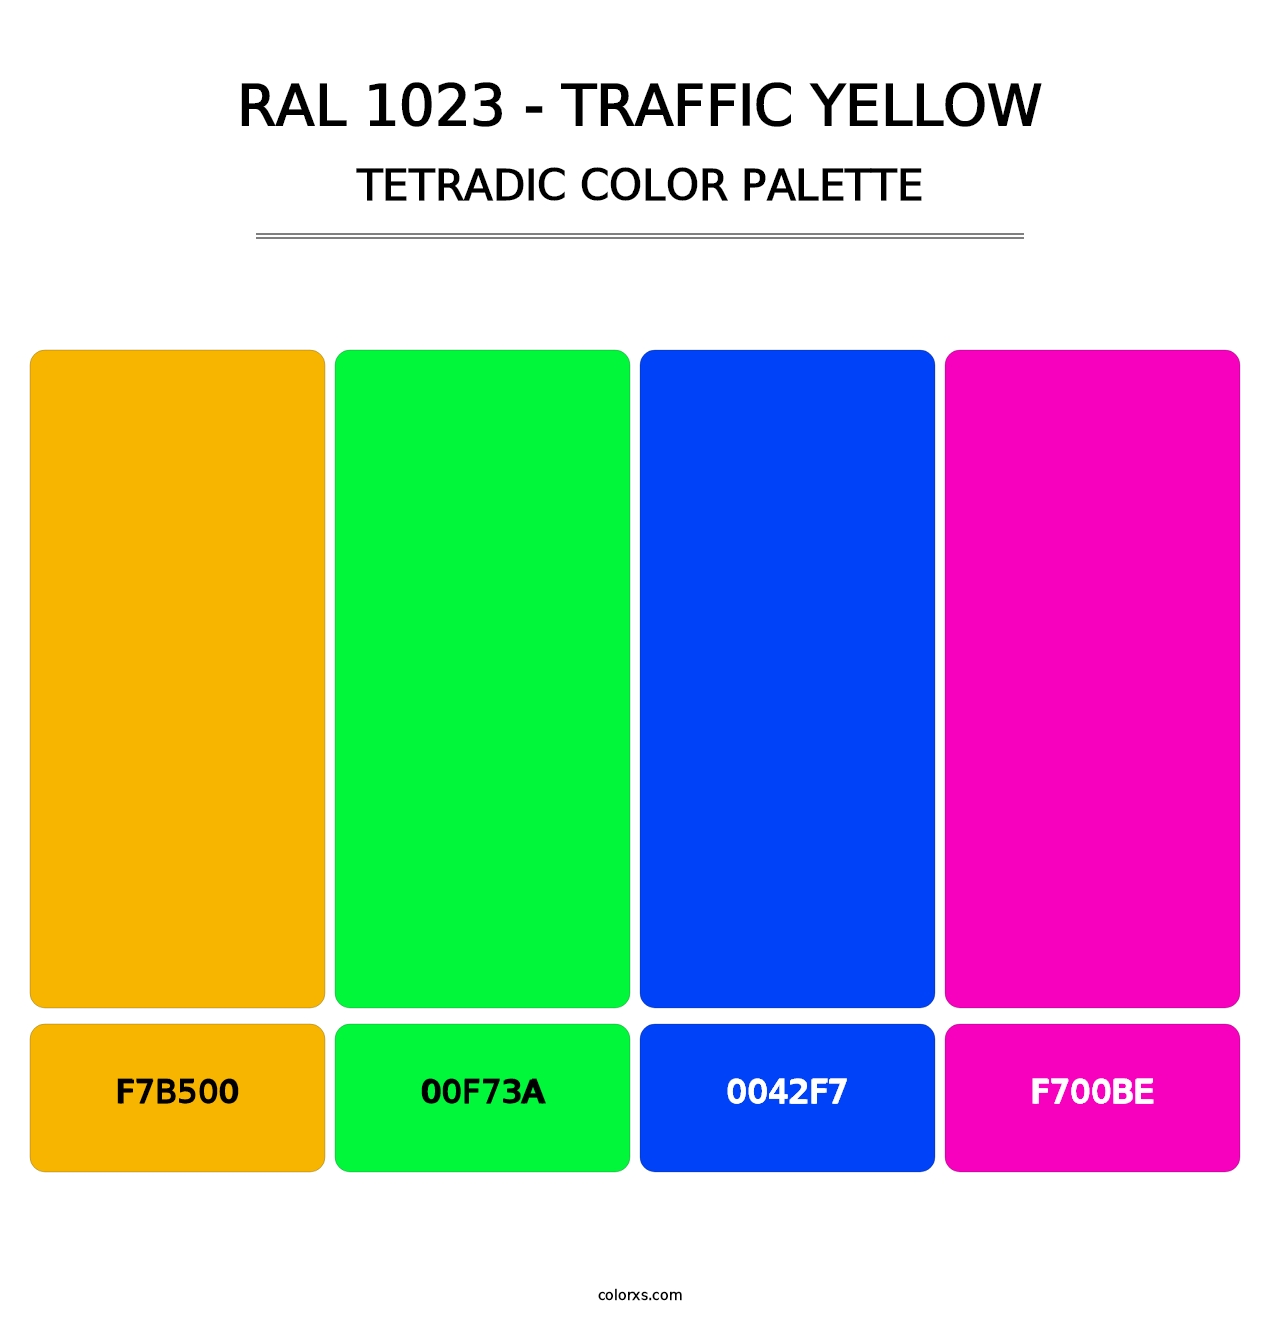 RAL 1023 - Traffic Yellow - Tetradic Color Palette